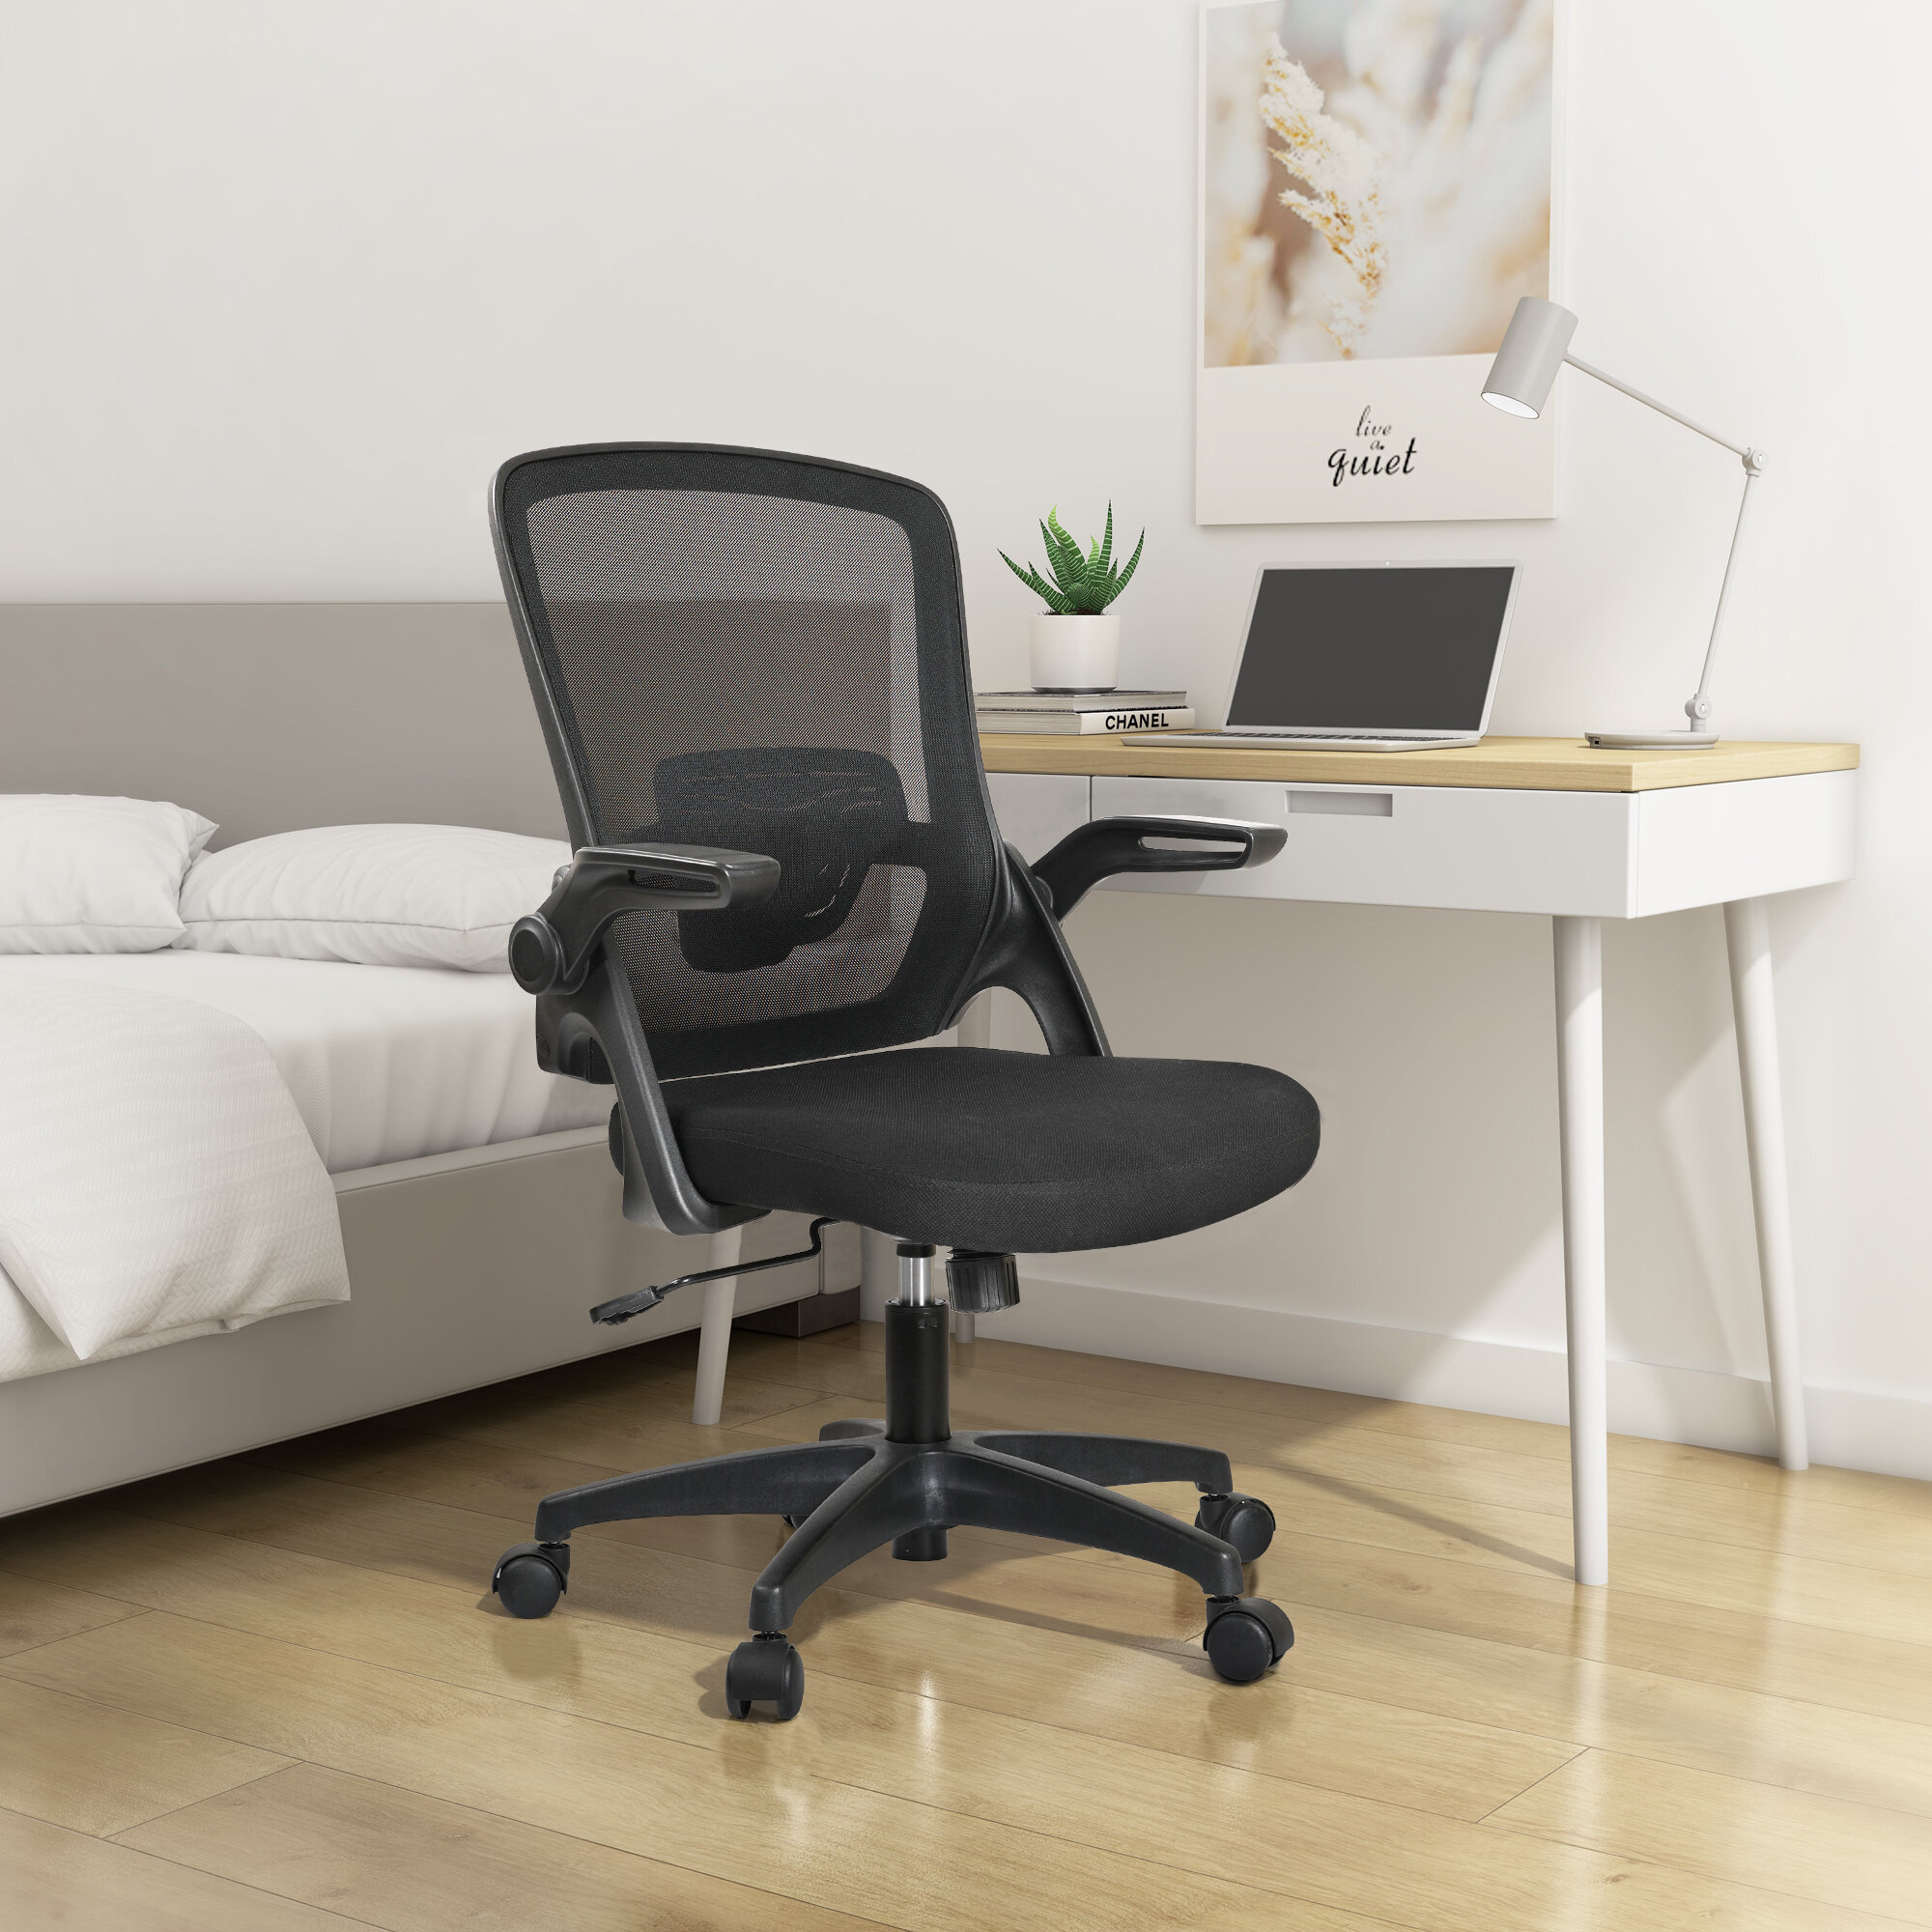 Details about   Ergonomic Office Chair Mid-back Mesh Computer Desk Task Swivel Chair Home 